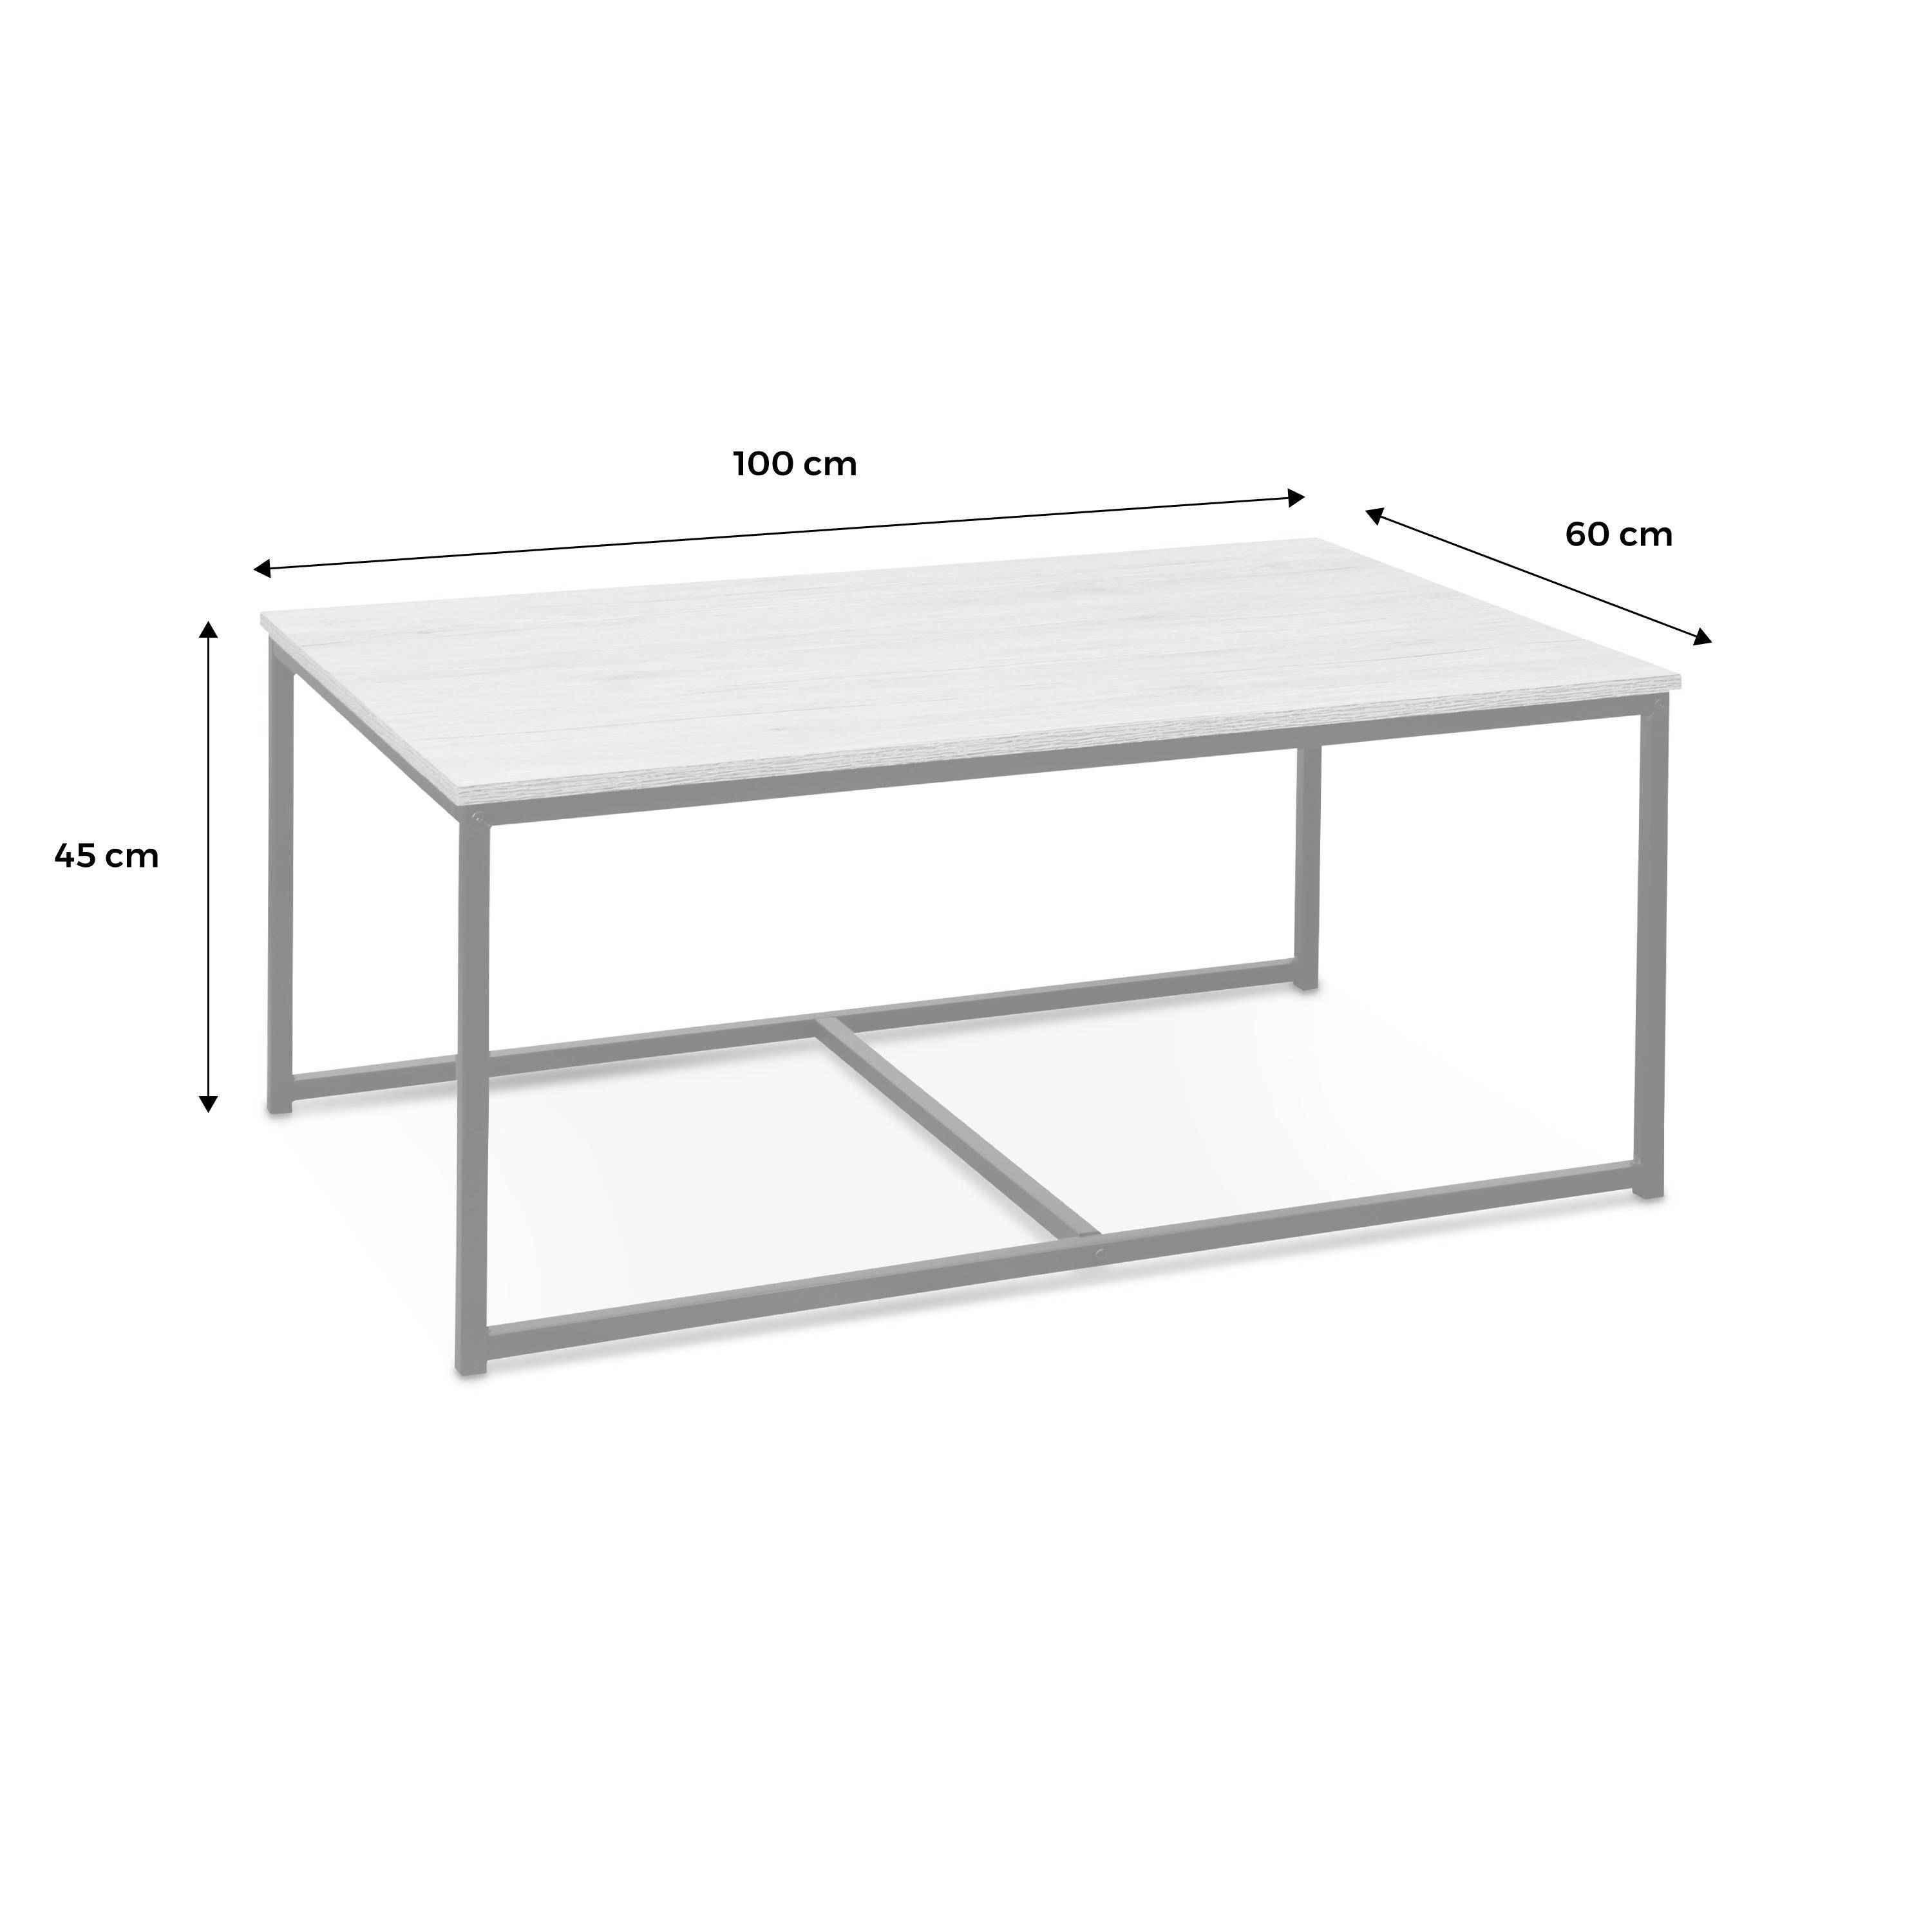 Set of 3 metal and wood-effect nesting tables, large table 100x60x45cm, 2x small tables 50x50x38cm - Loft - Black,sweeek,Photo10